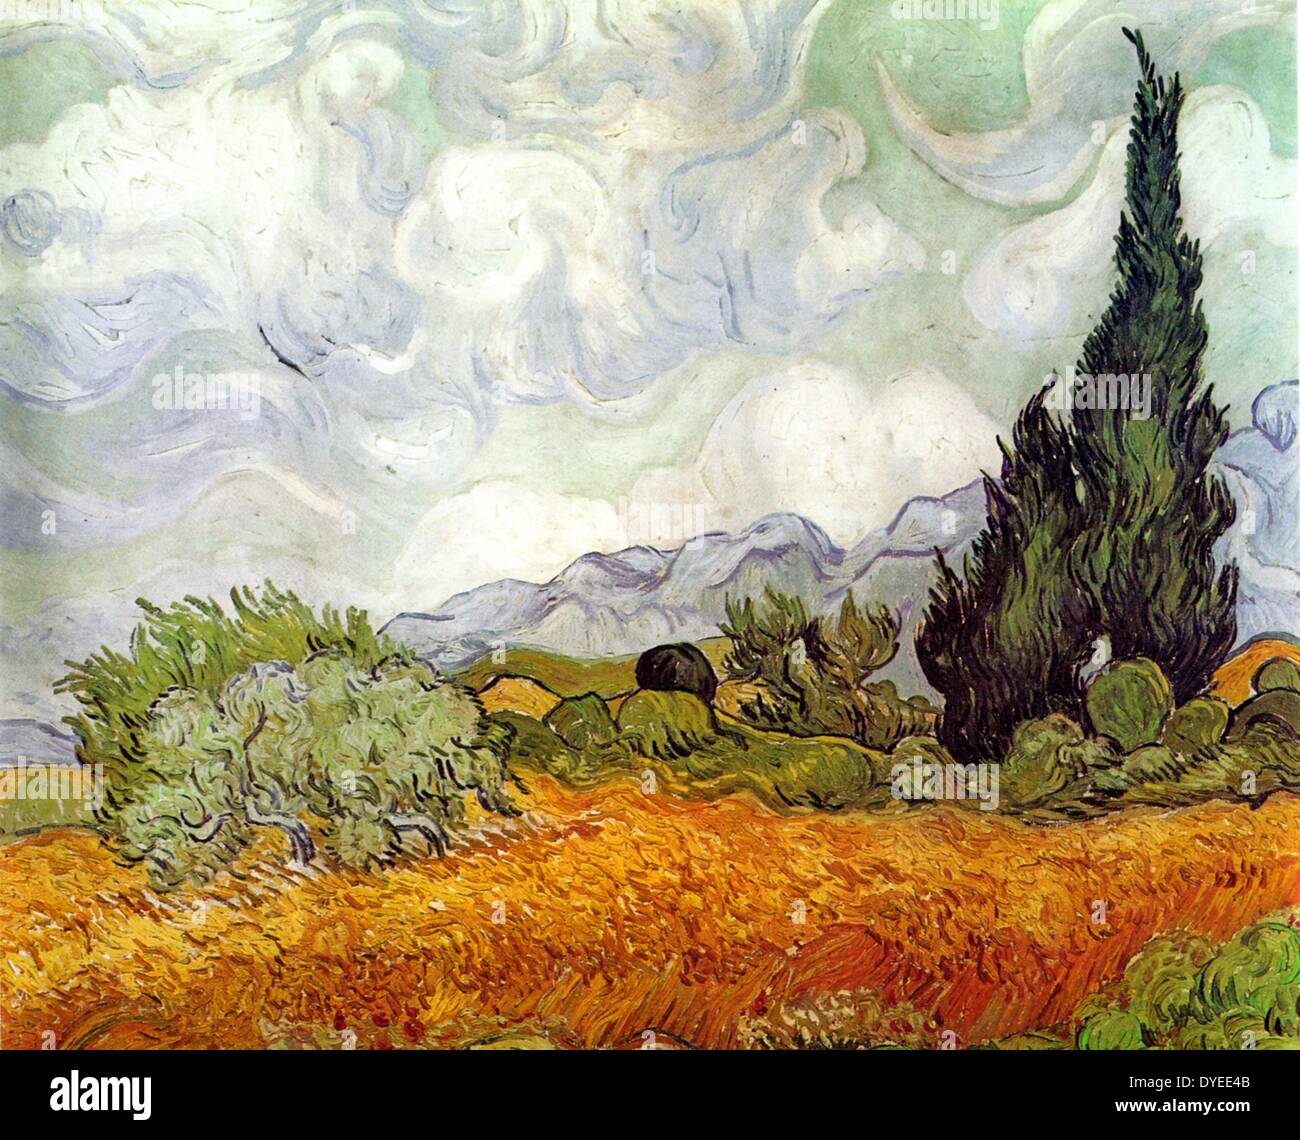 Vincent van Gogh's Wheatfield with Cypresses 1889 A.D. Stock Photo